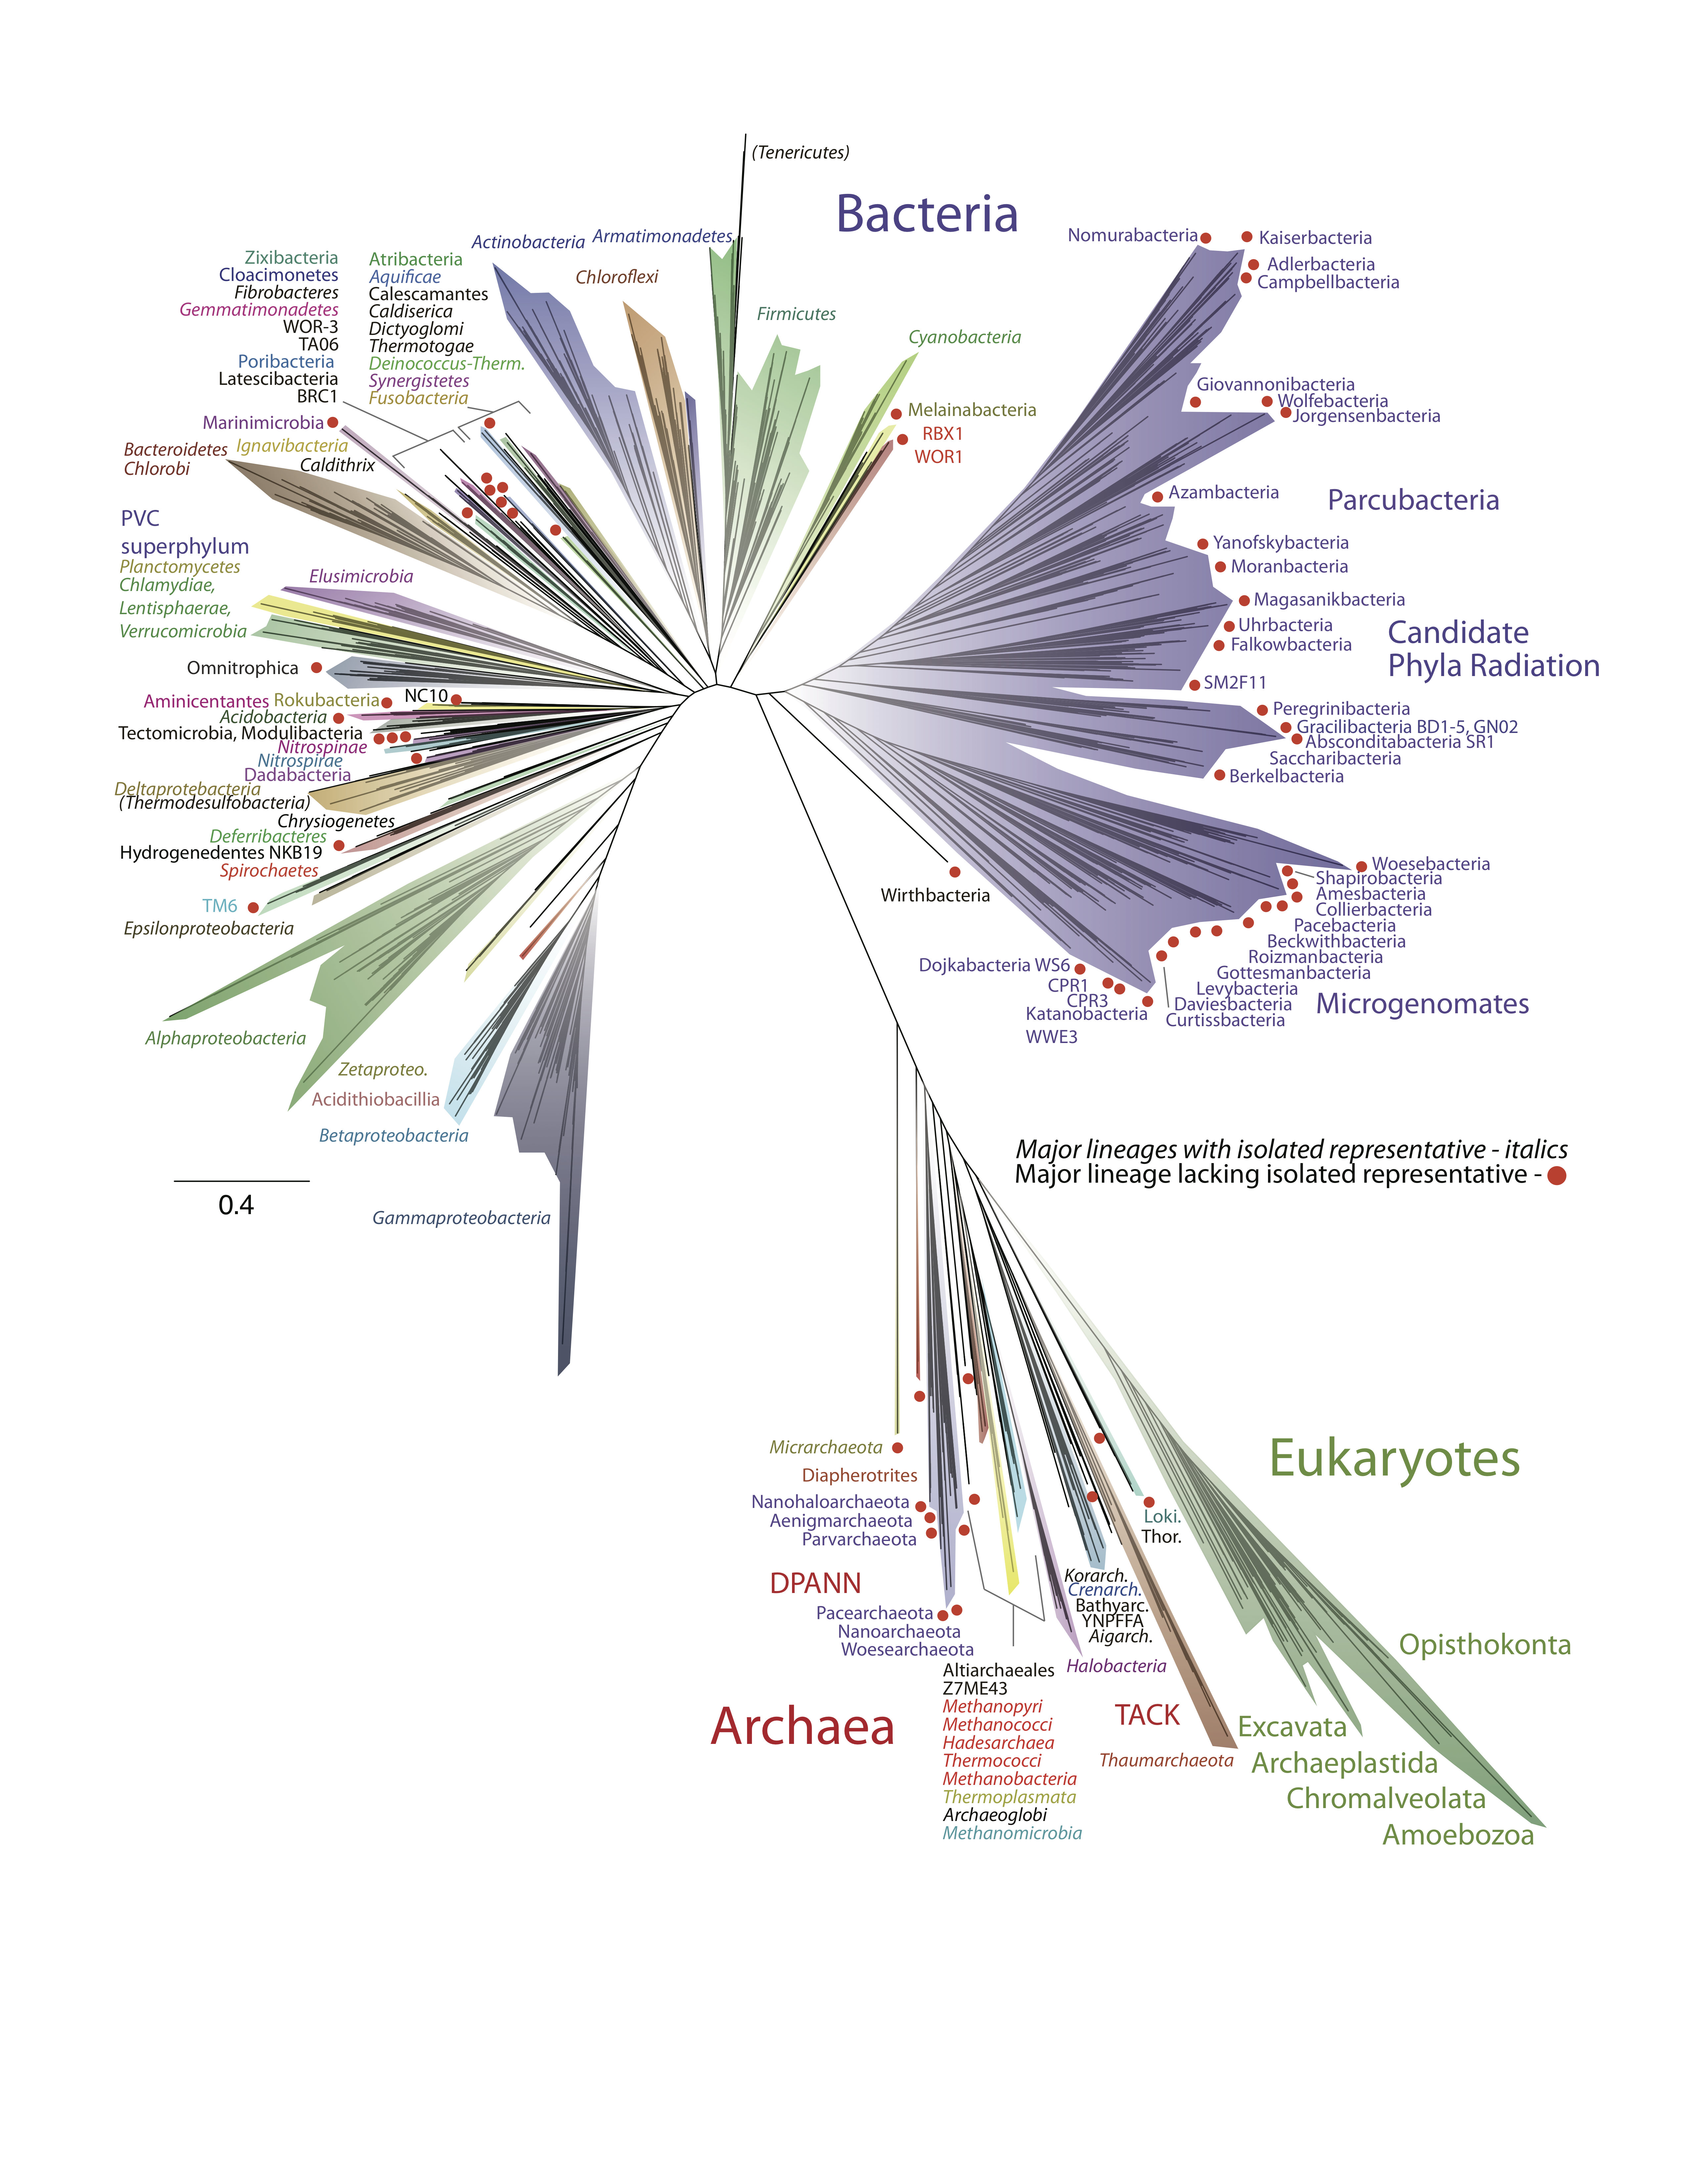 Figure shows An updated tree of life with Archaea at the bottom, along with the Eukaryotes, which emerge from within the archaea.